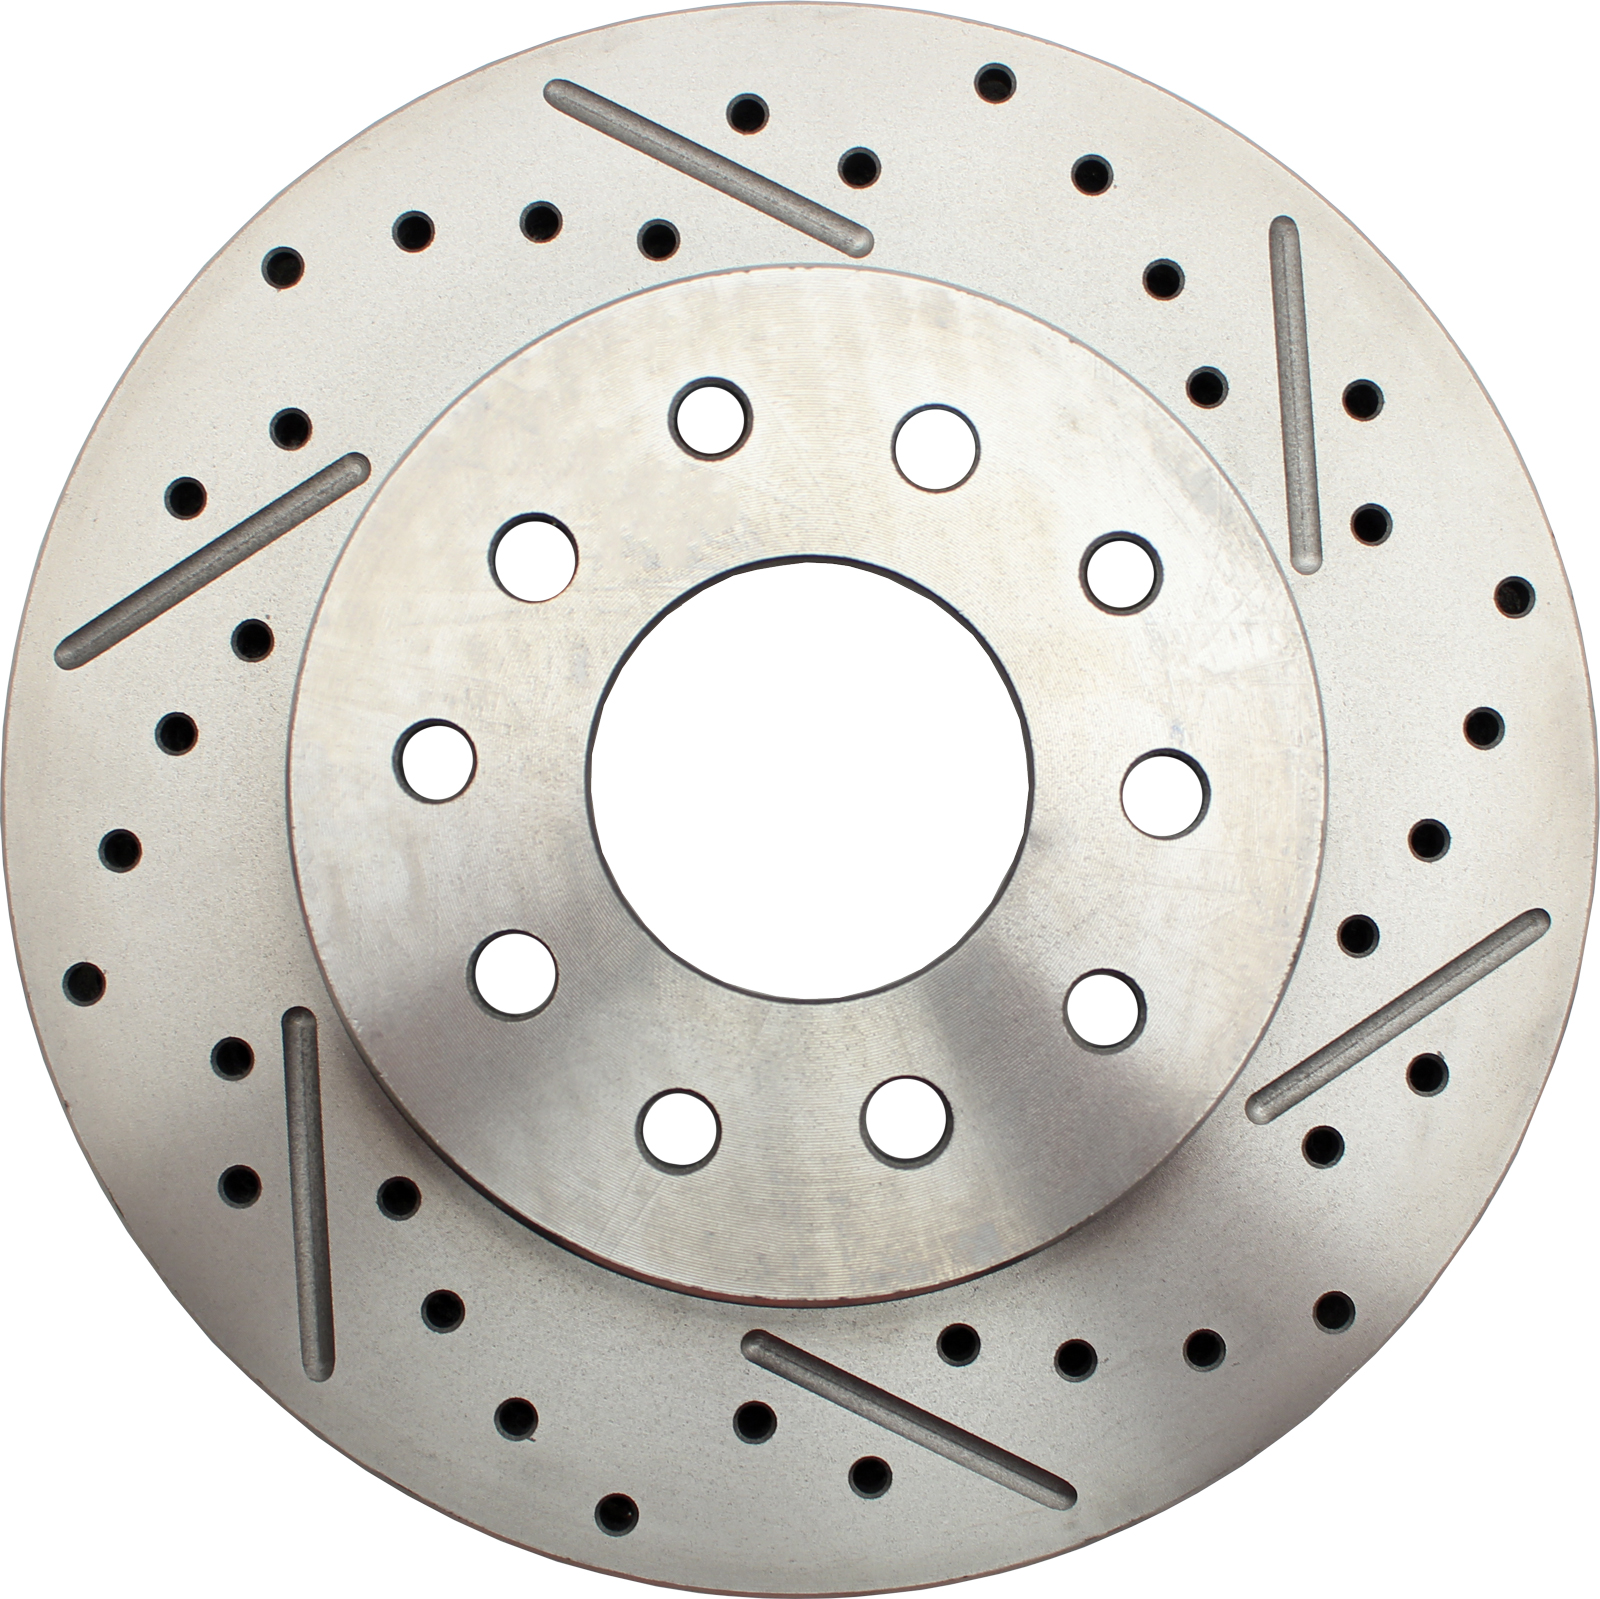  Universal Rear Ford 9 / GM 1012 Bolt Pattern Drilled/ Slotted  (Driver Side)